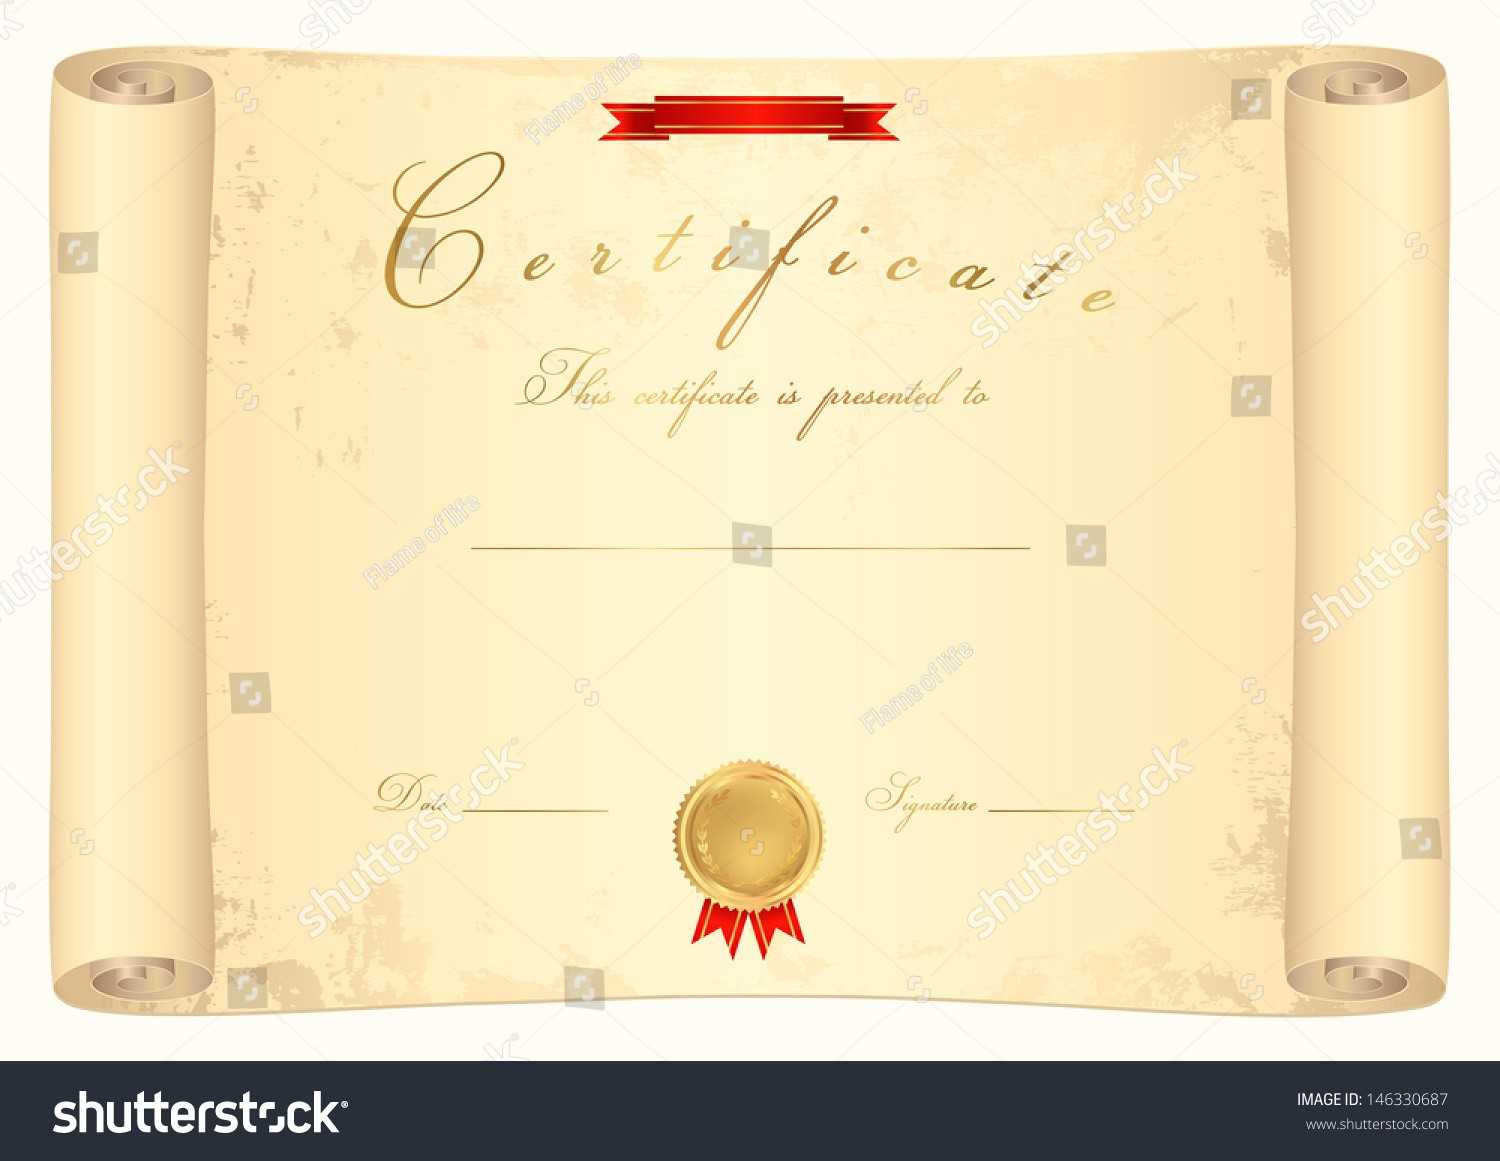 Scroll Certificate Completion Template Sample Background Throughout Scroll Certificate Templates